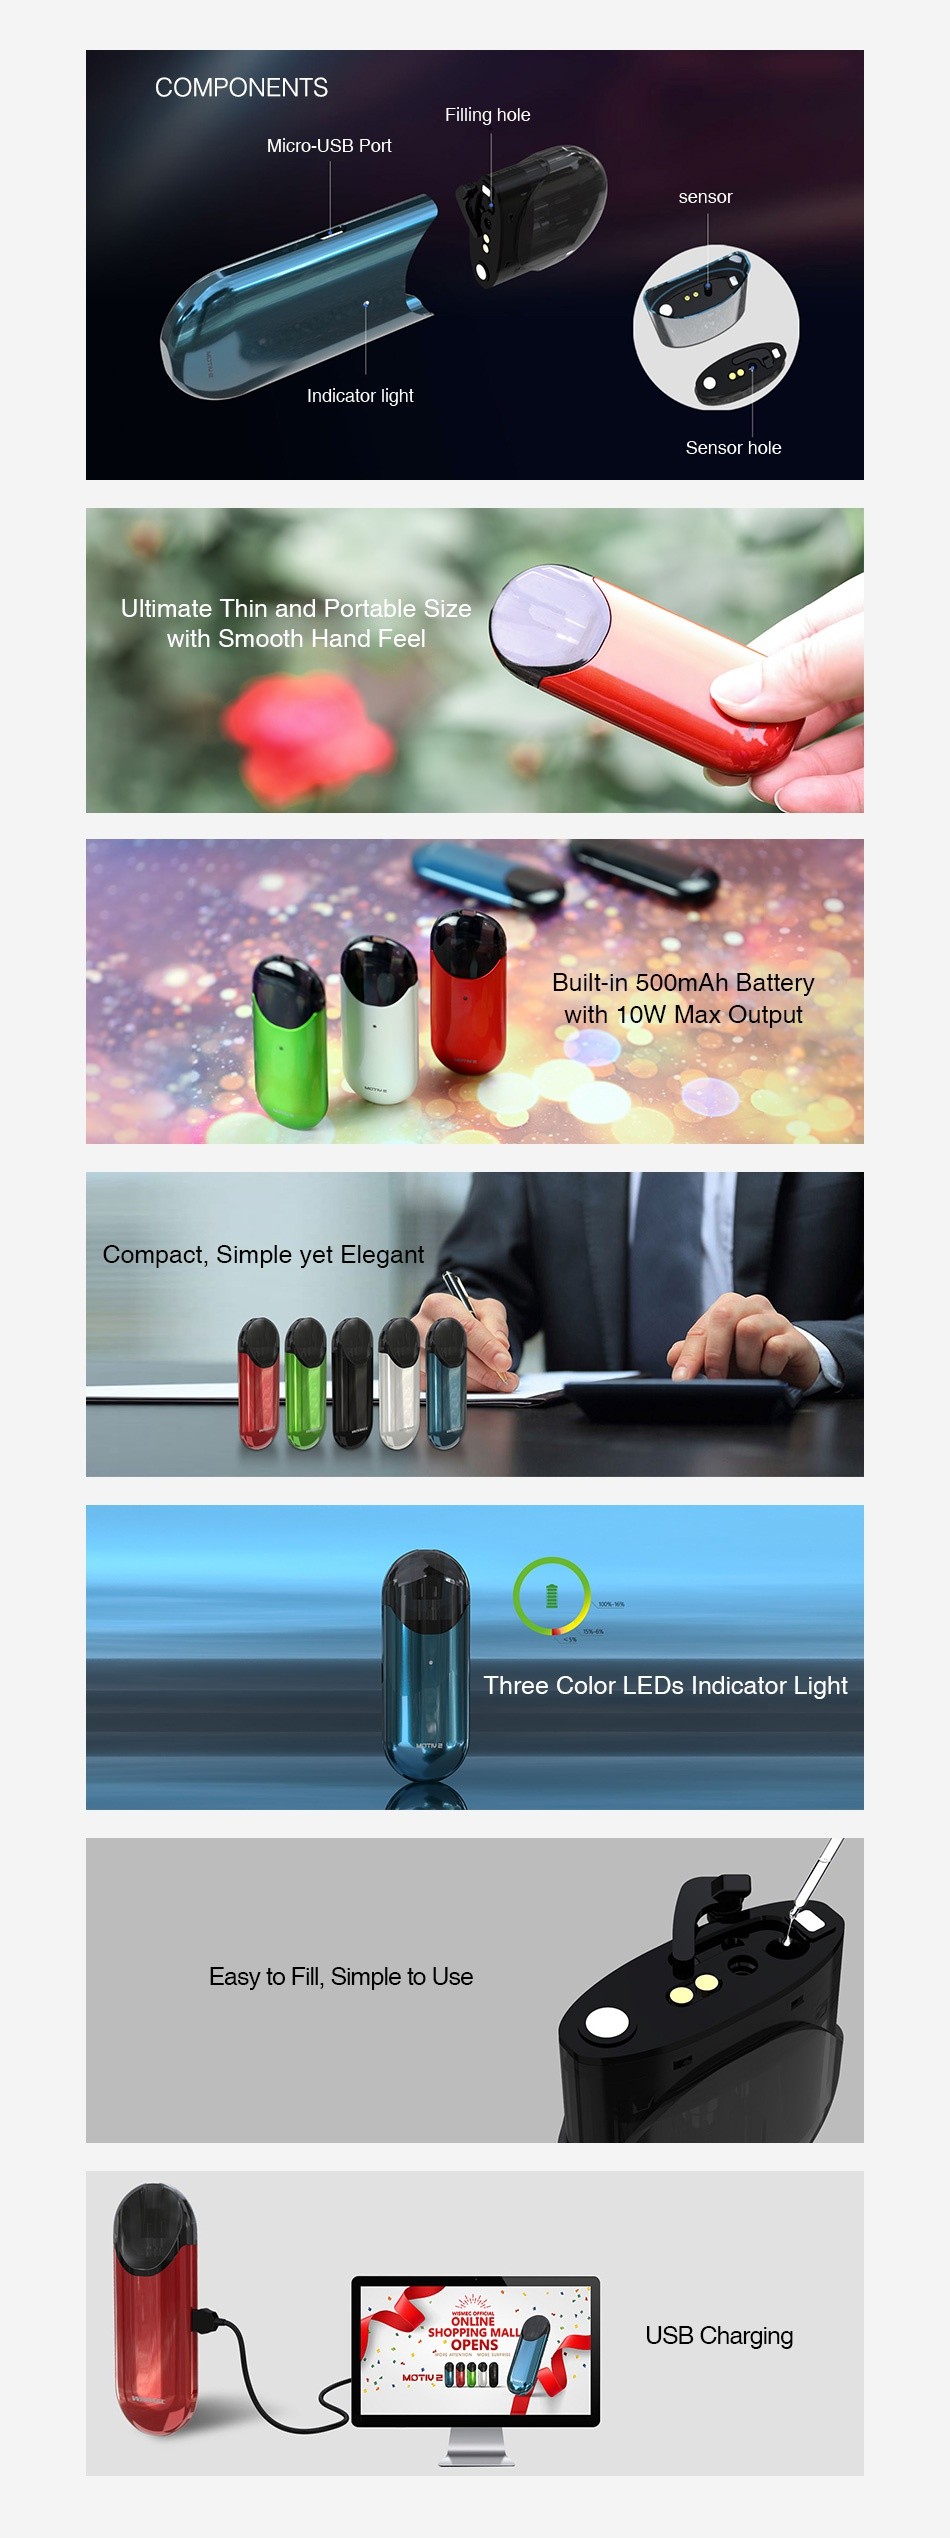 WISMEC Motiv 2 Pod Starter Kit 500mAh COMPONENTS Filling hole sensor Itimate Thin and Portable size with Smooth Hand Feel Built in 500mAh batte th 1oW Max Output Compact  Simple yet Elegant Three Color LEDs Indicator Light Fill  Simple to Us agiNg